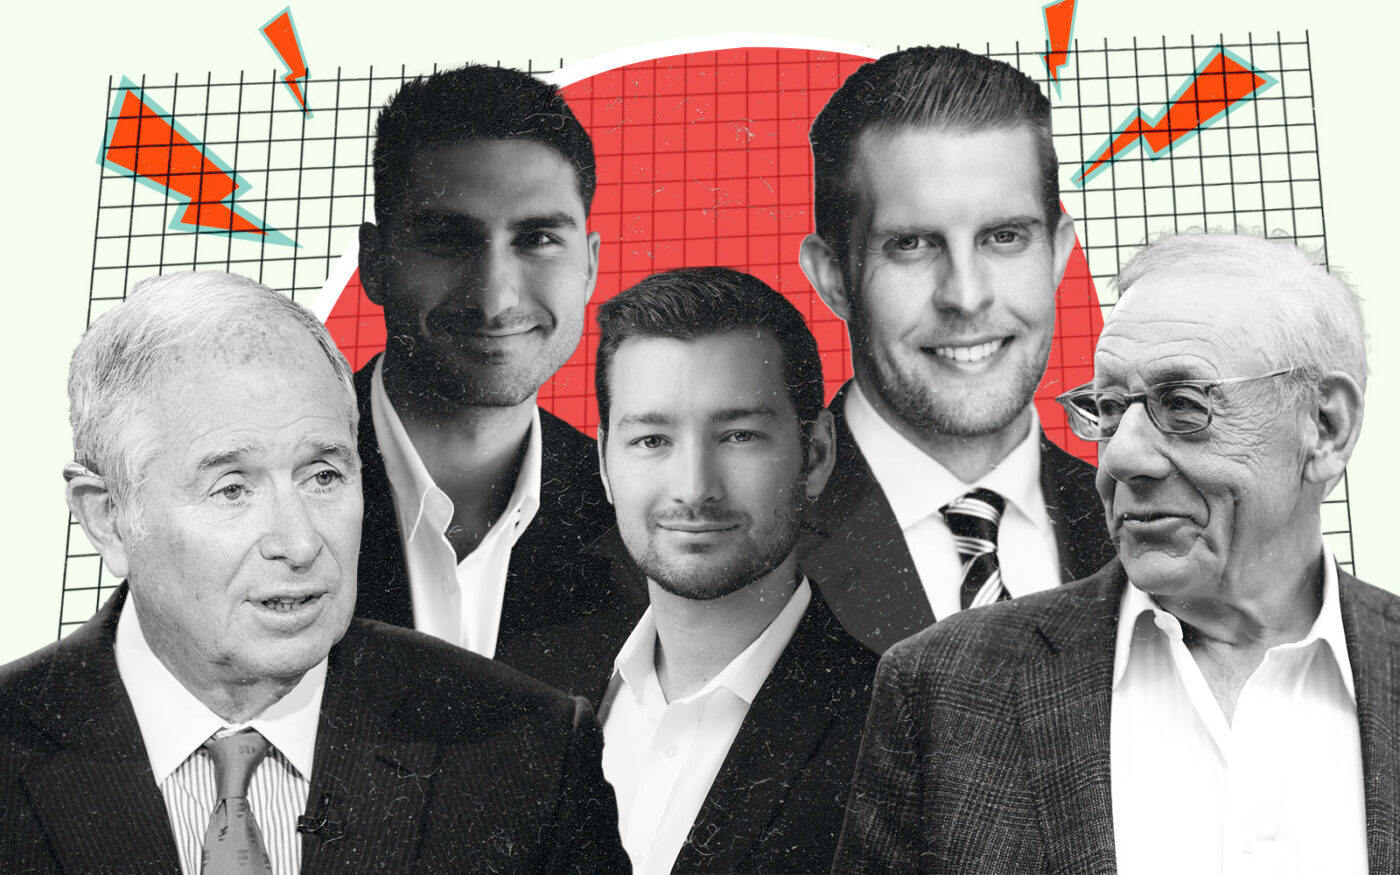 Blackstone's Stephen Schwarzman, Tides Equities’ Sean Kia and Ryan Andrade, Zach Haptonstall and Related's Stephen Ross